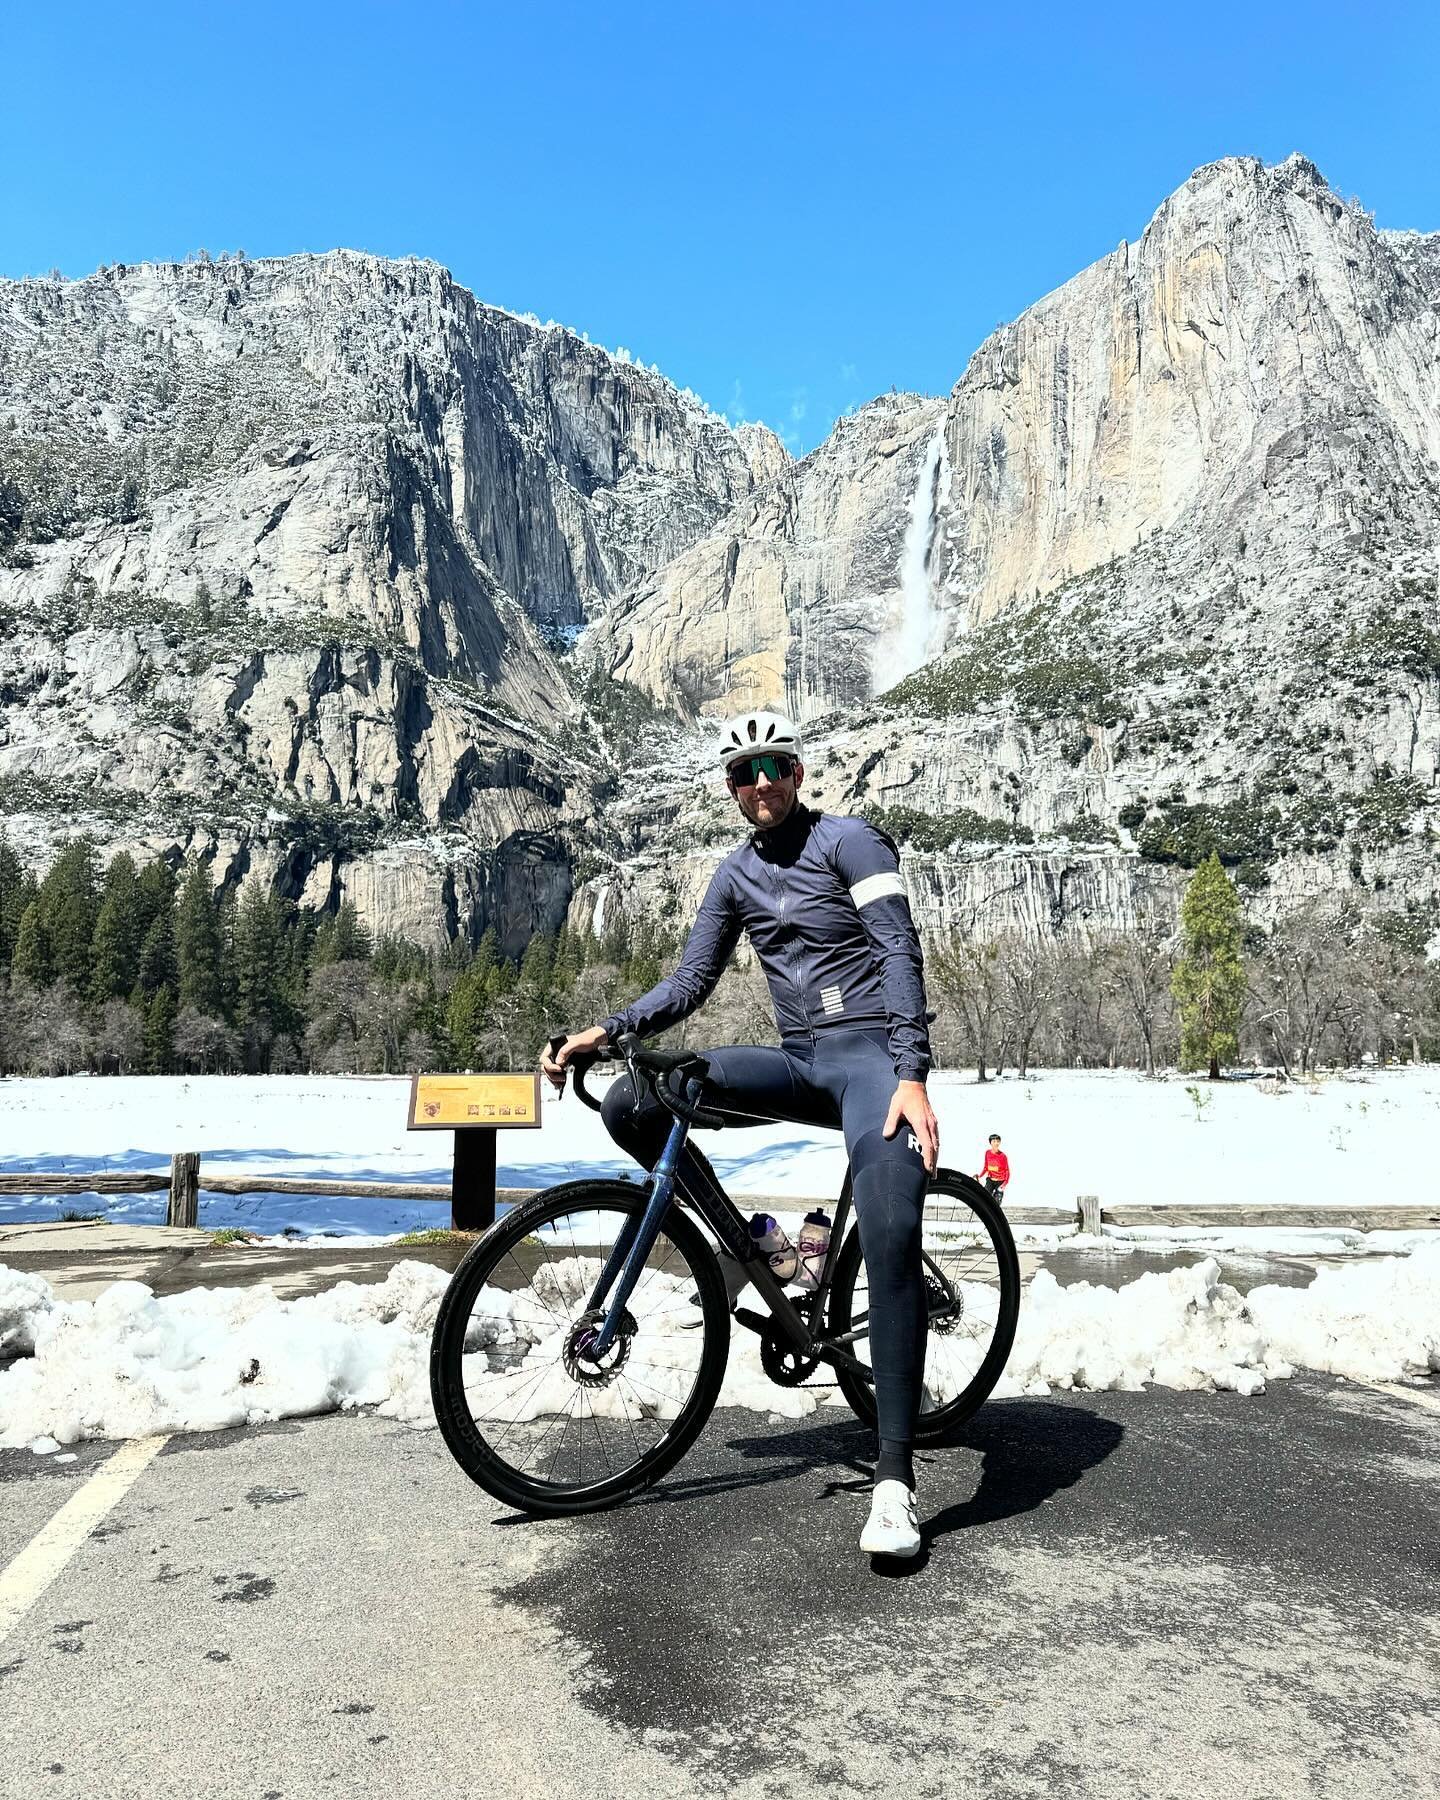 Just one of those rides you&rsquo;ll remember forever. 

Surprised by 5 inches of snow shortly after our arrival in California it made the ride over into Yosemite National Park even more special with the epic scenery covered in a white blanket. 

Sta